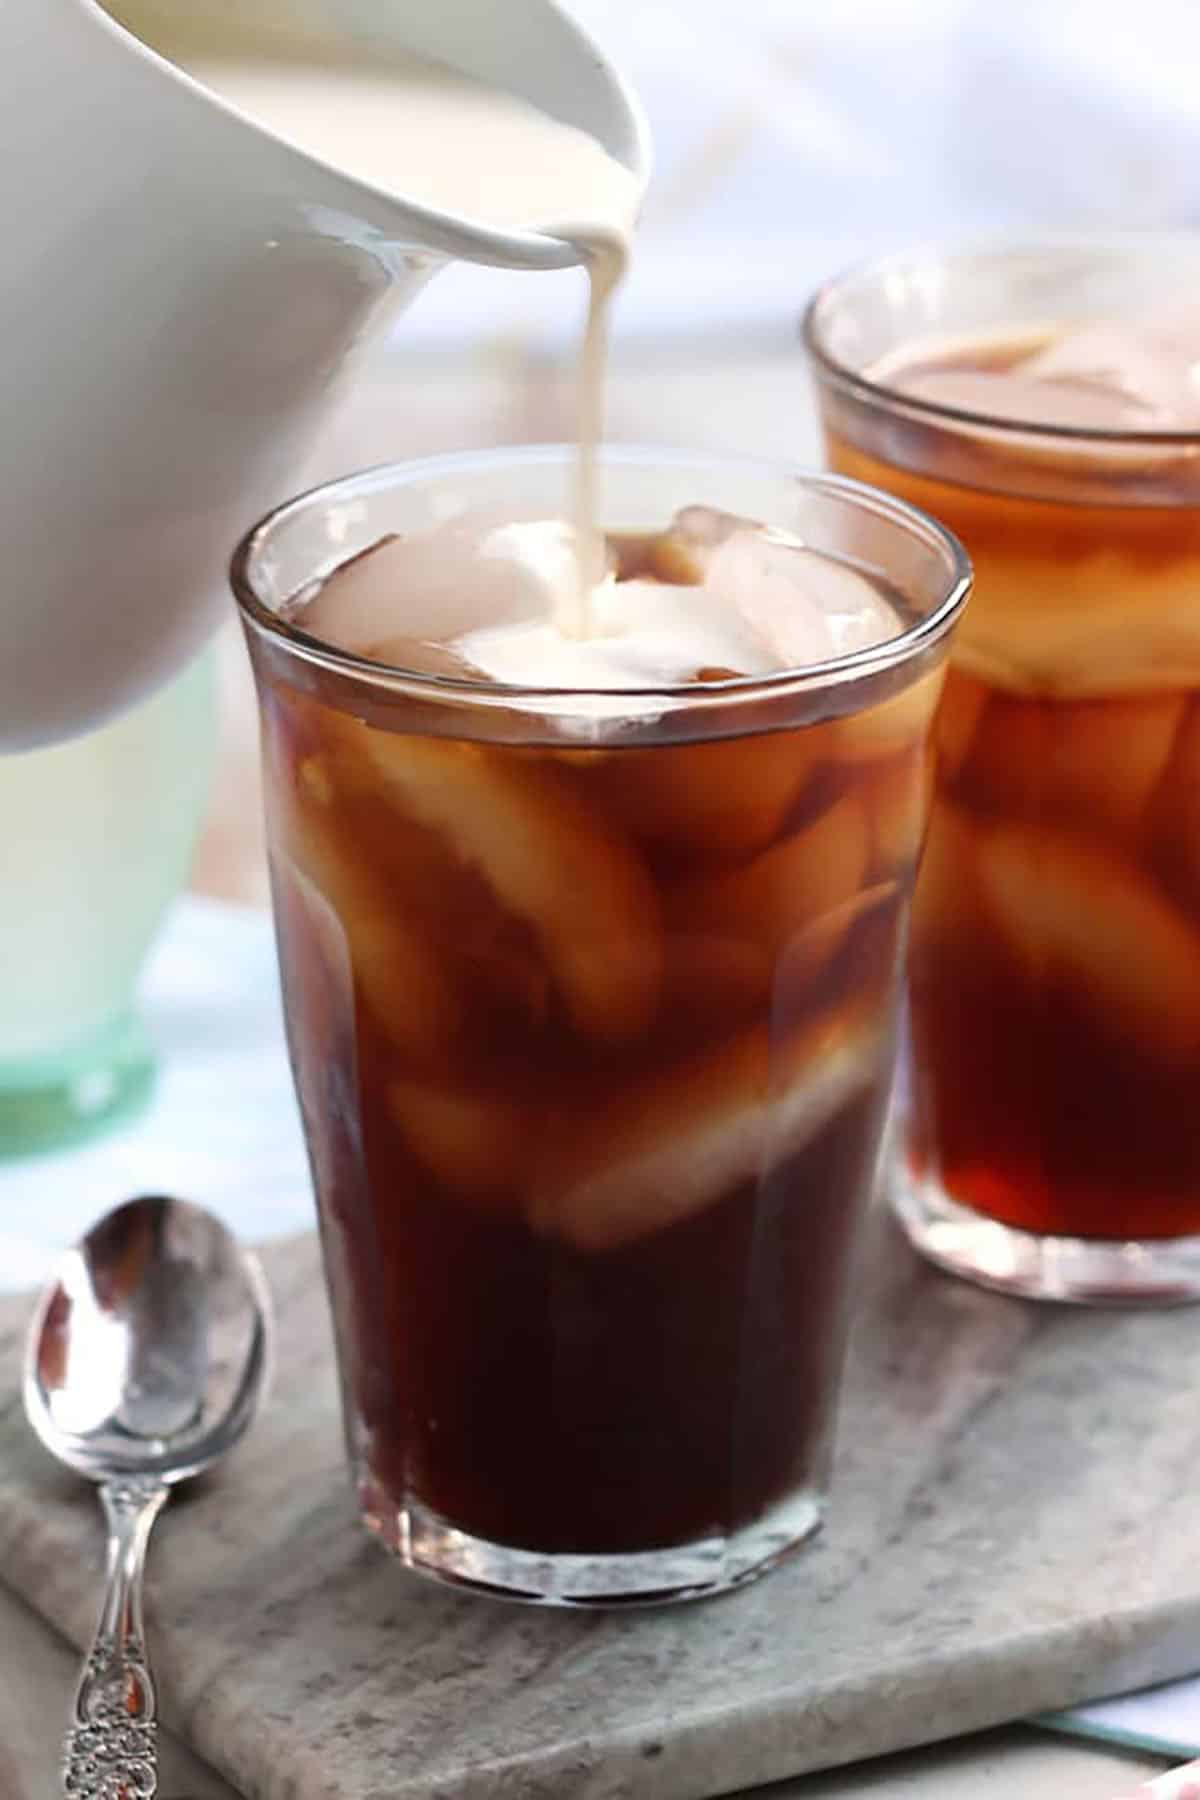 cream being poured into a glass of cold brew coffee with ice and a spoon to the left of the glass.